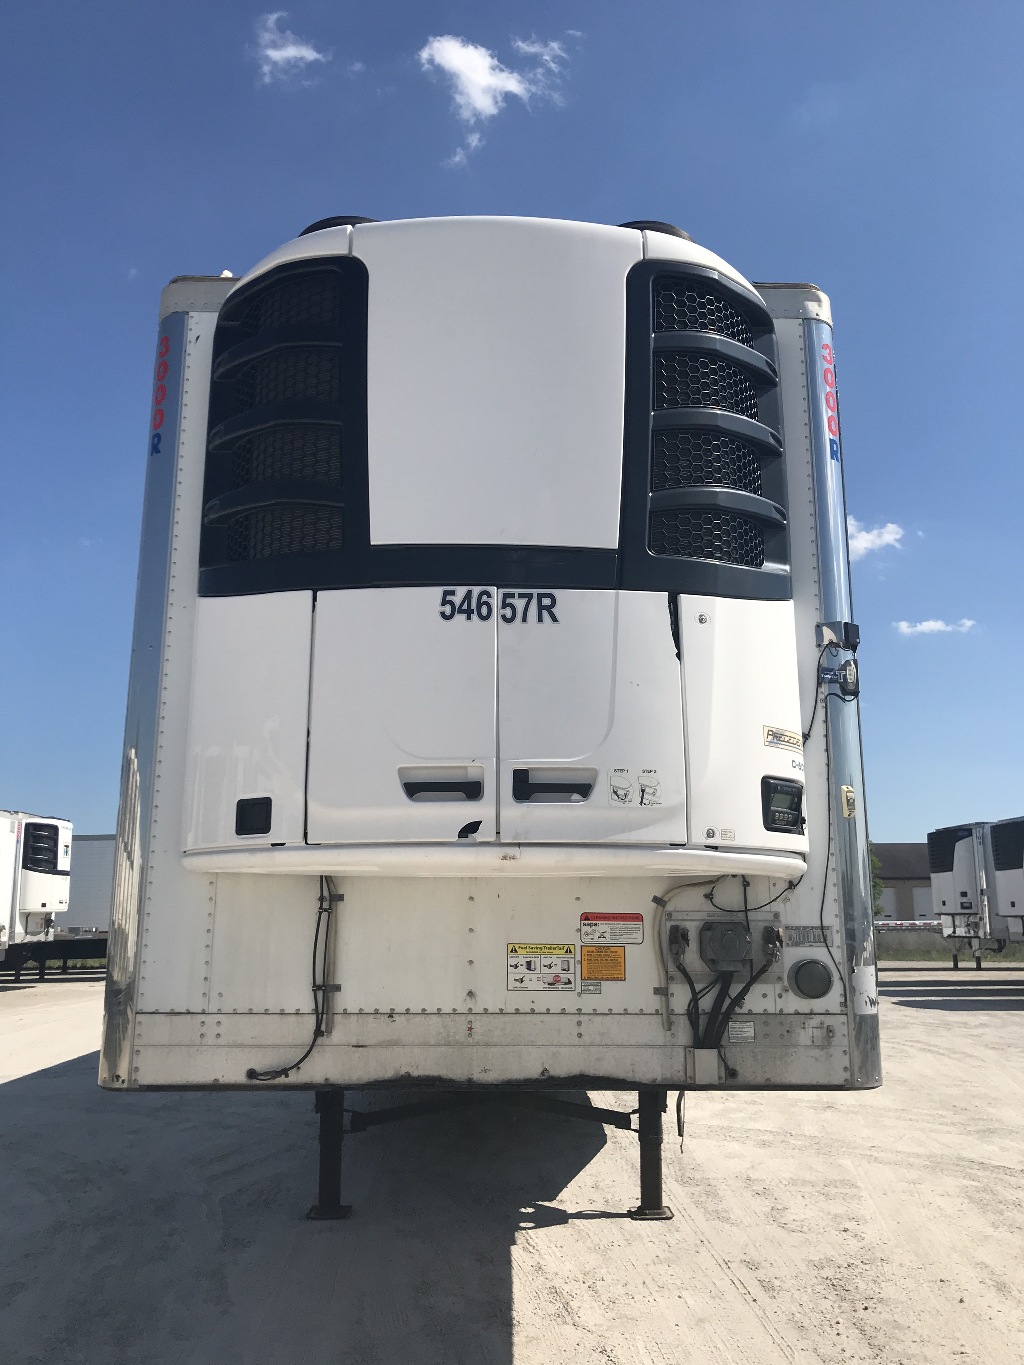 USED 2017 UTILITY 3000R REEFER TRAILER #301793